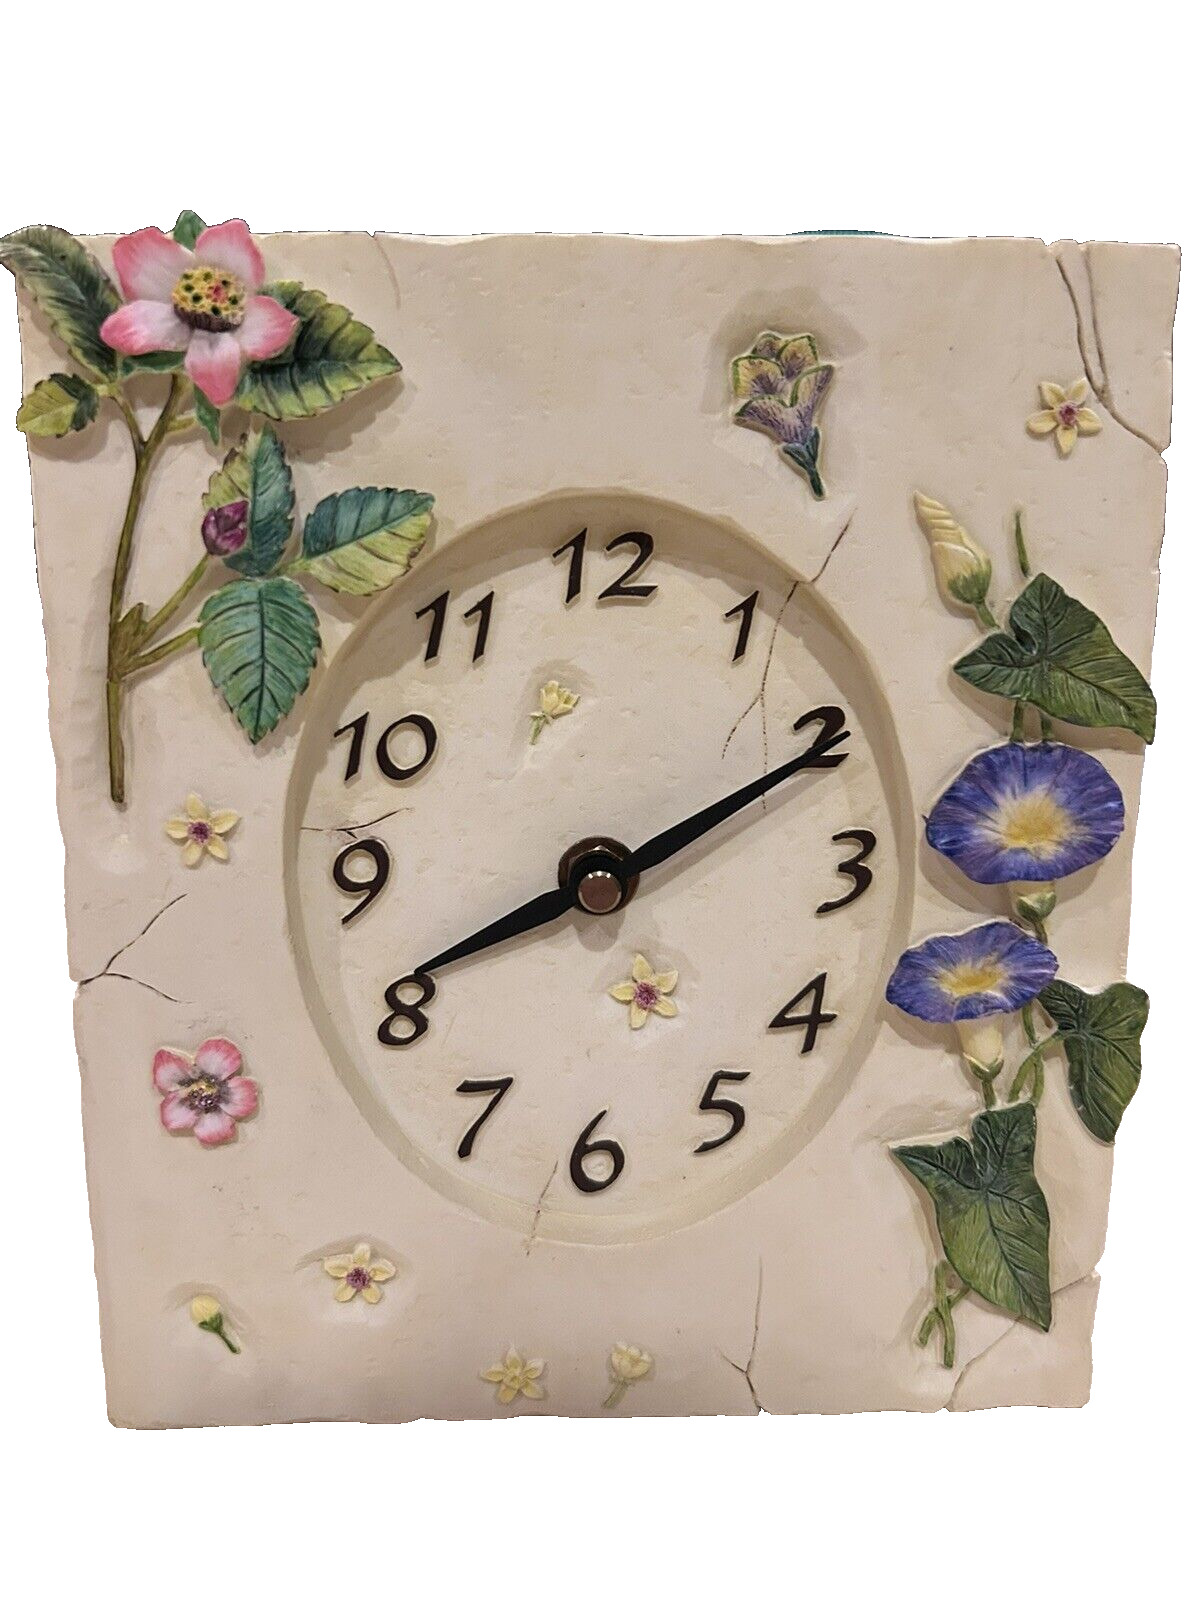 Floral Novelty Morning Glory Garden Flowers Ceramic Battery Wall Clock Vintage